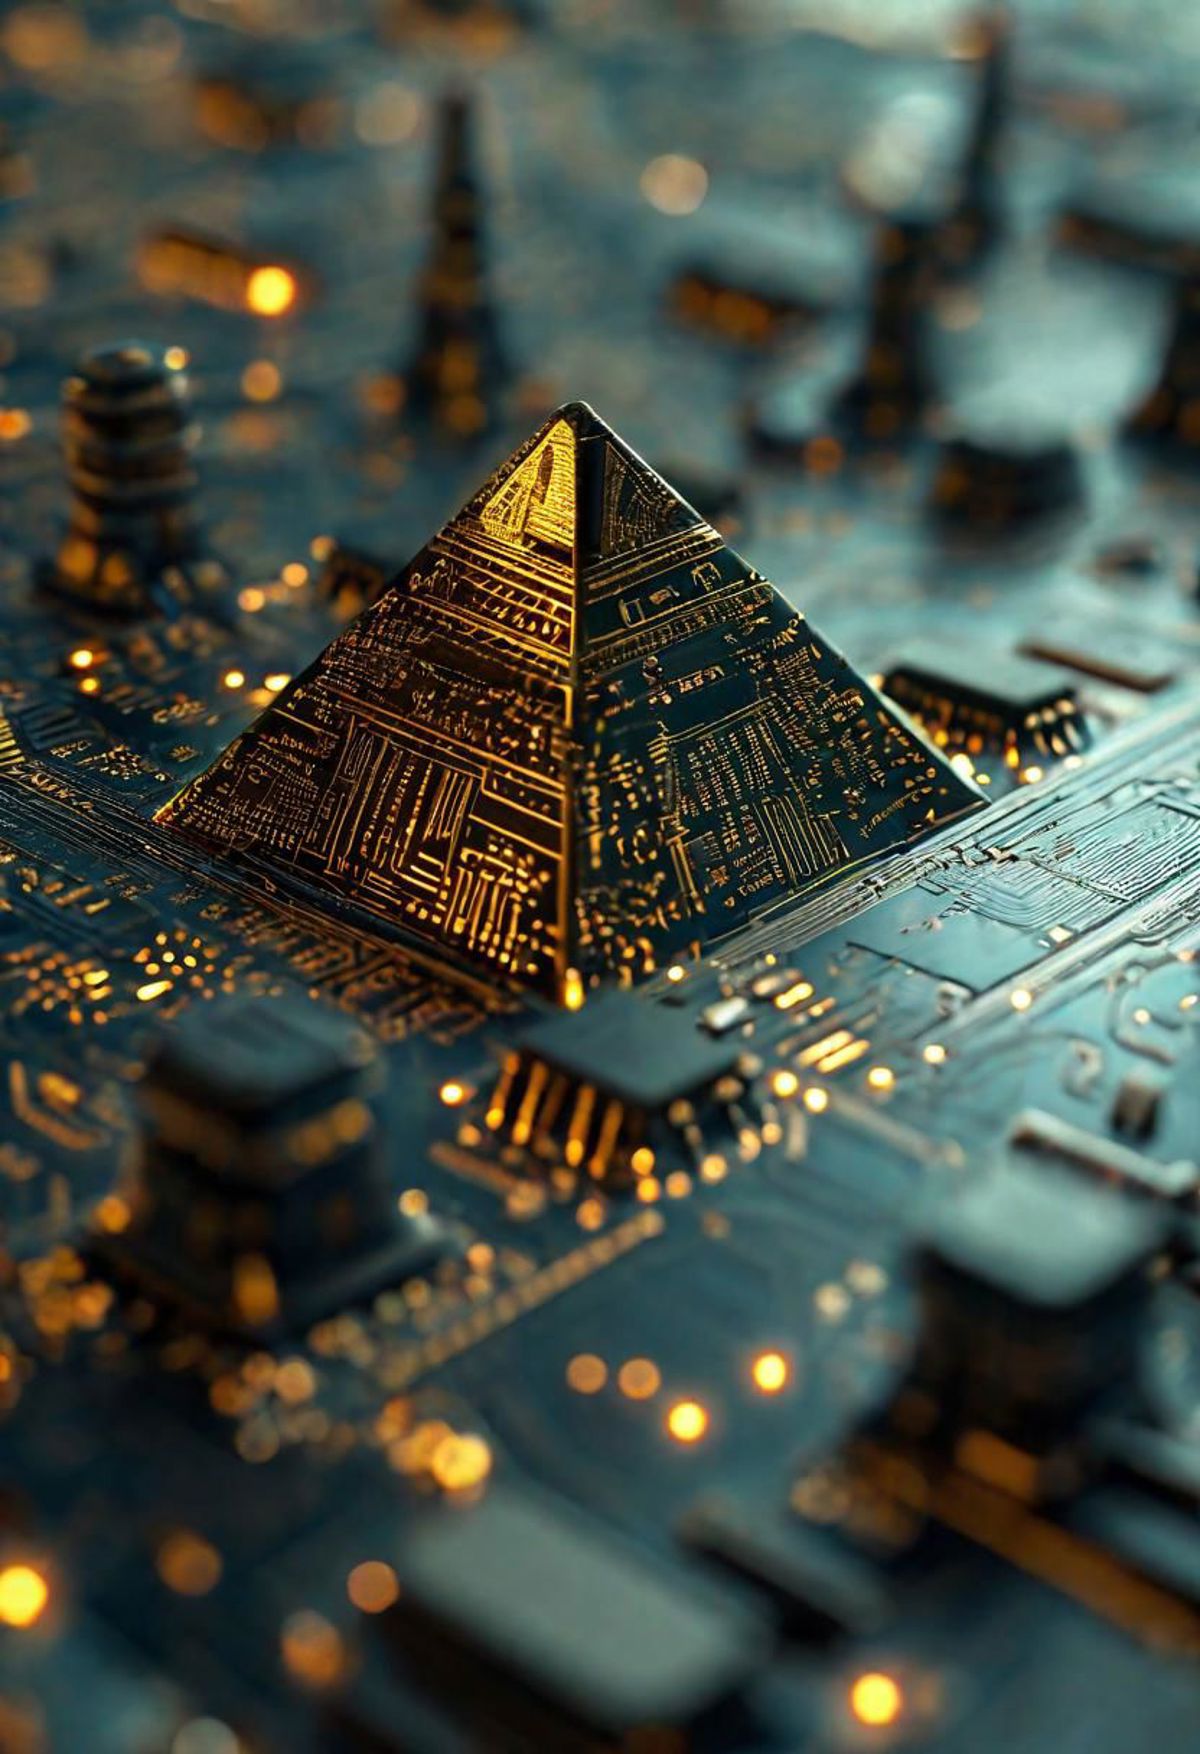 A golden pyramid on top of a circuit board.